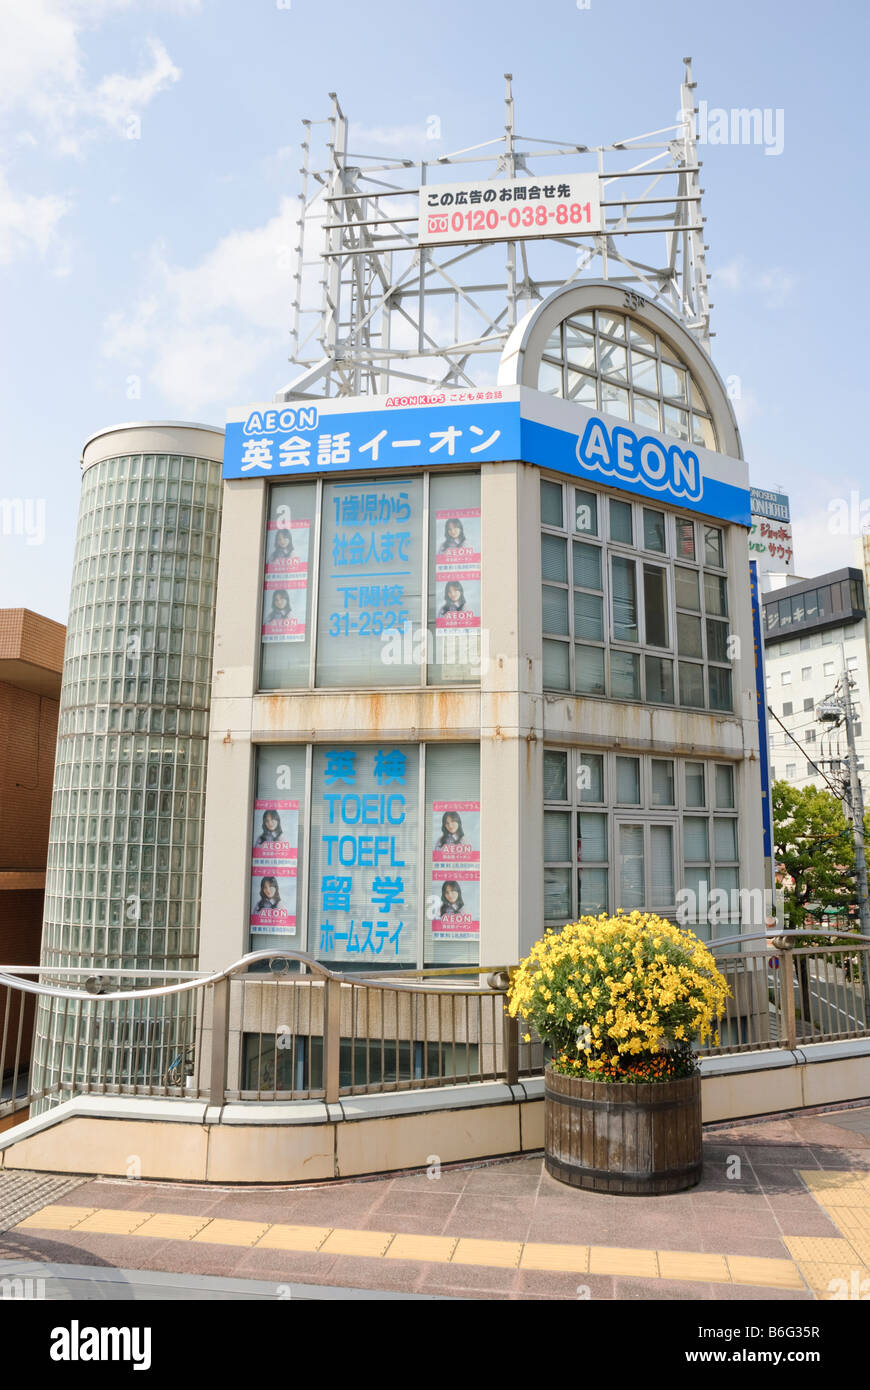 An English language school (part of the national AEON chain) that caters to both children and adults in Japan. Stock Photo